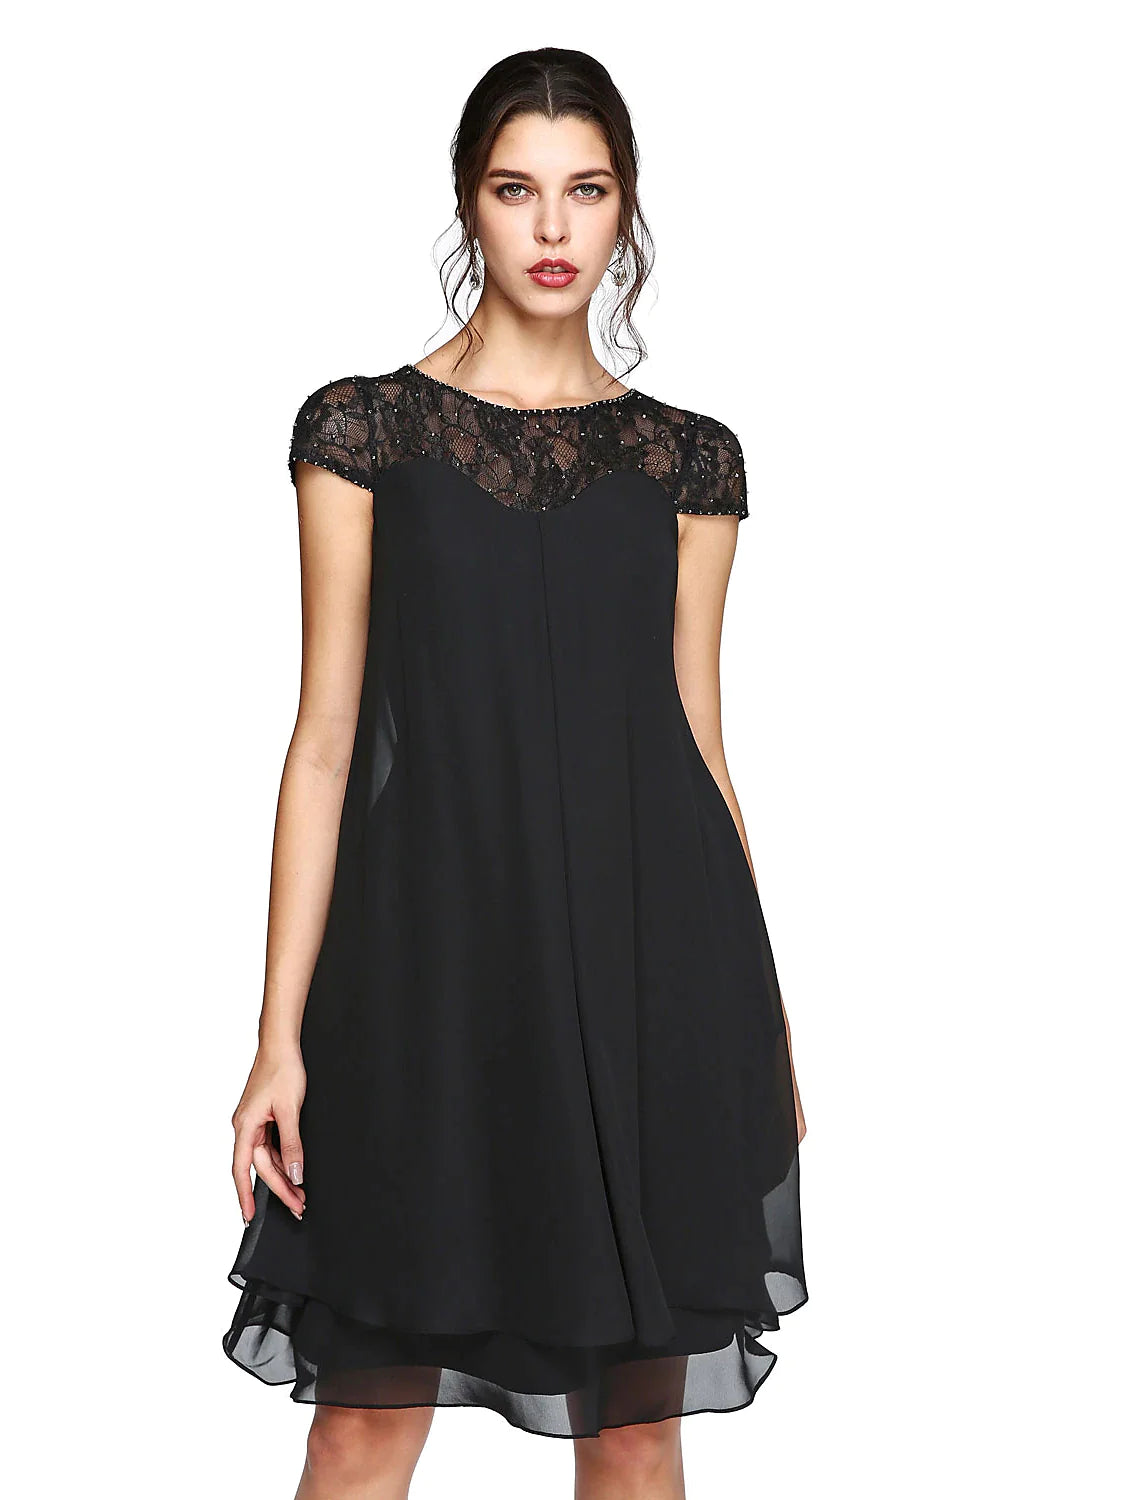 A-Line Mother of the Bride Dress Plus Size Elegant Illusion Neck Knee Length Chiffon Lace Short Sleeve with Sequin